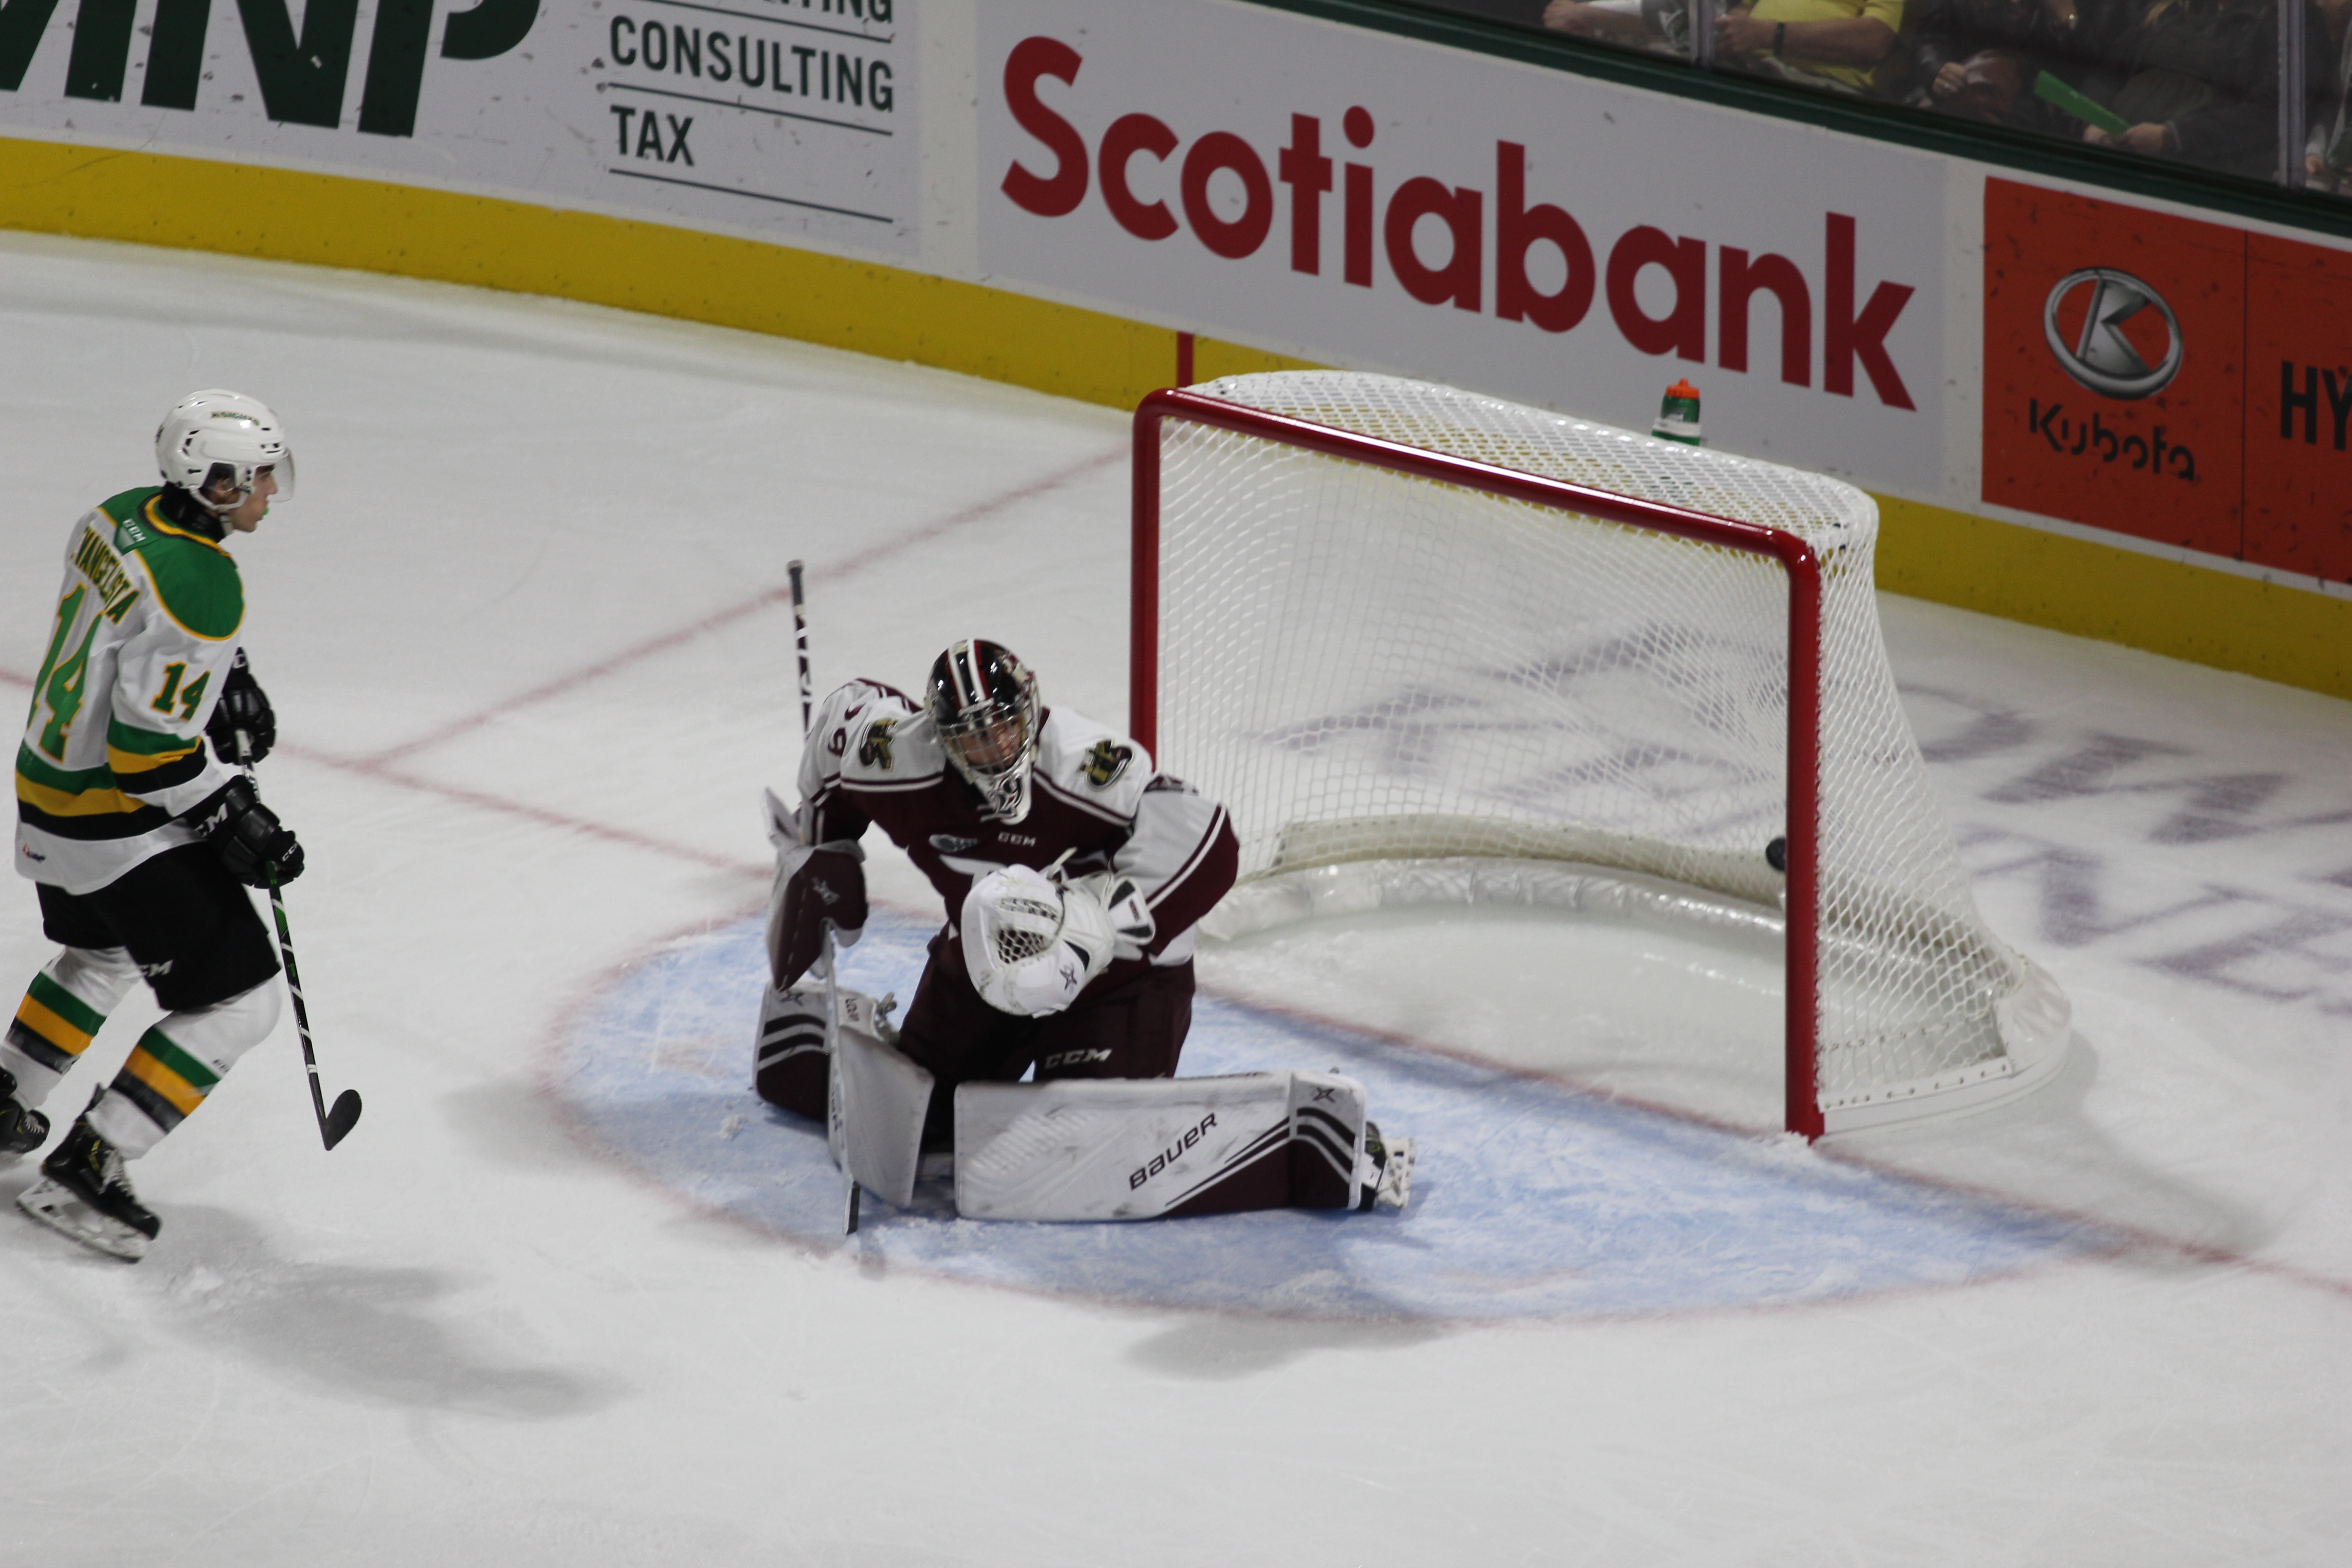 Peterborough Petes' Liam Kirk featured in The New York Times